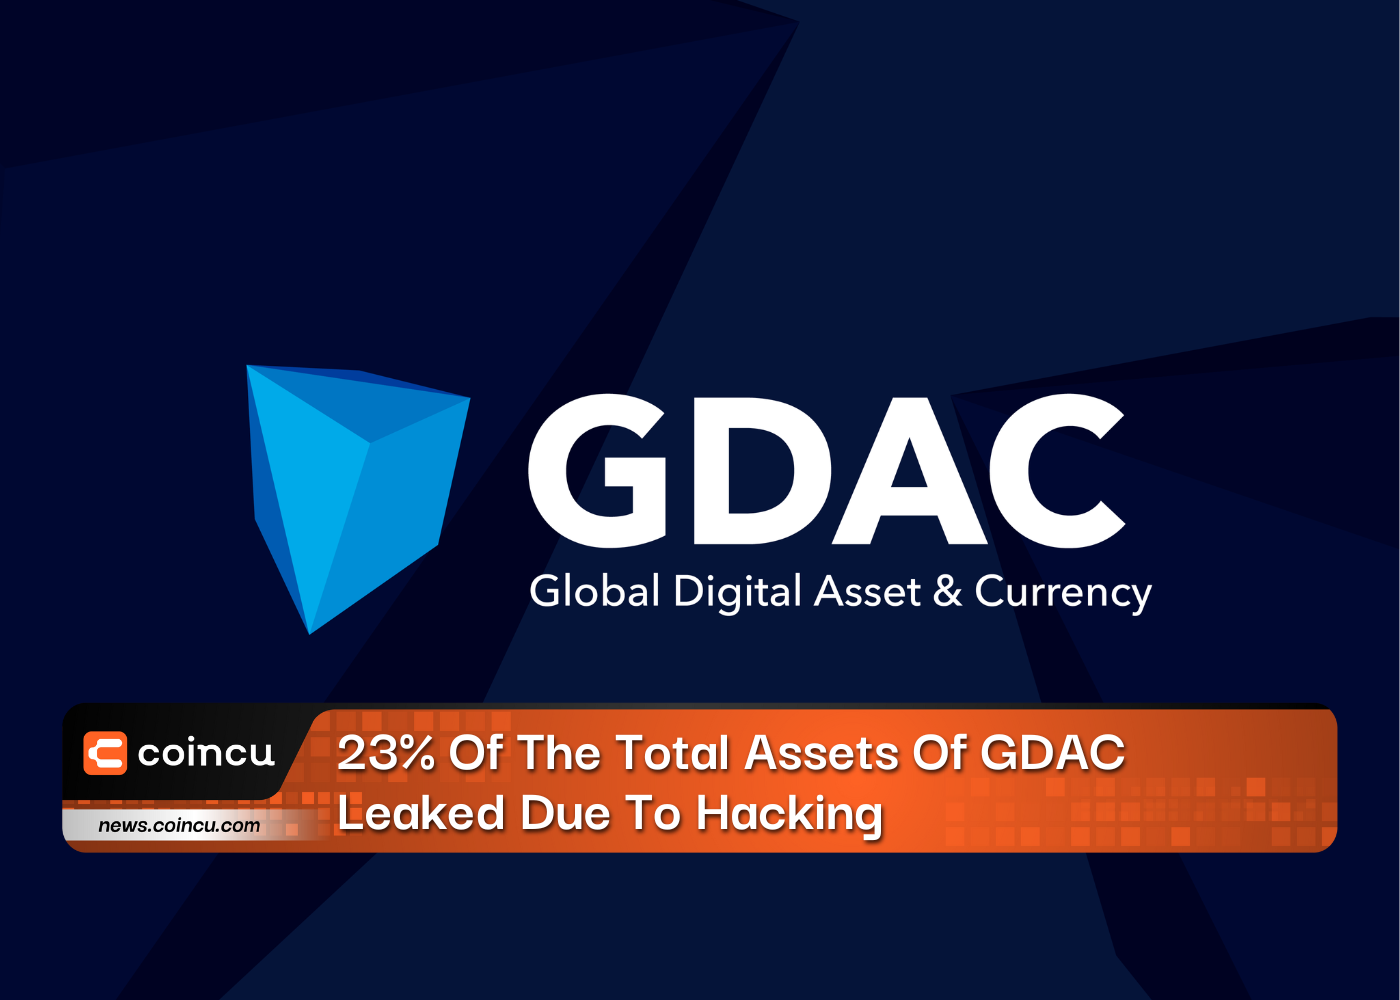 23% Of The Total Assets Of GDAC Leaked Due To Hacking